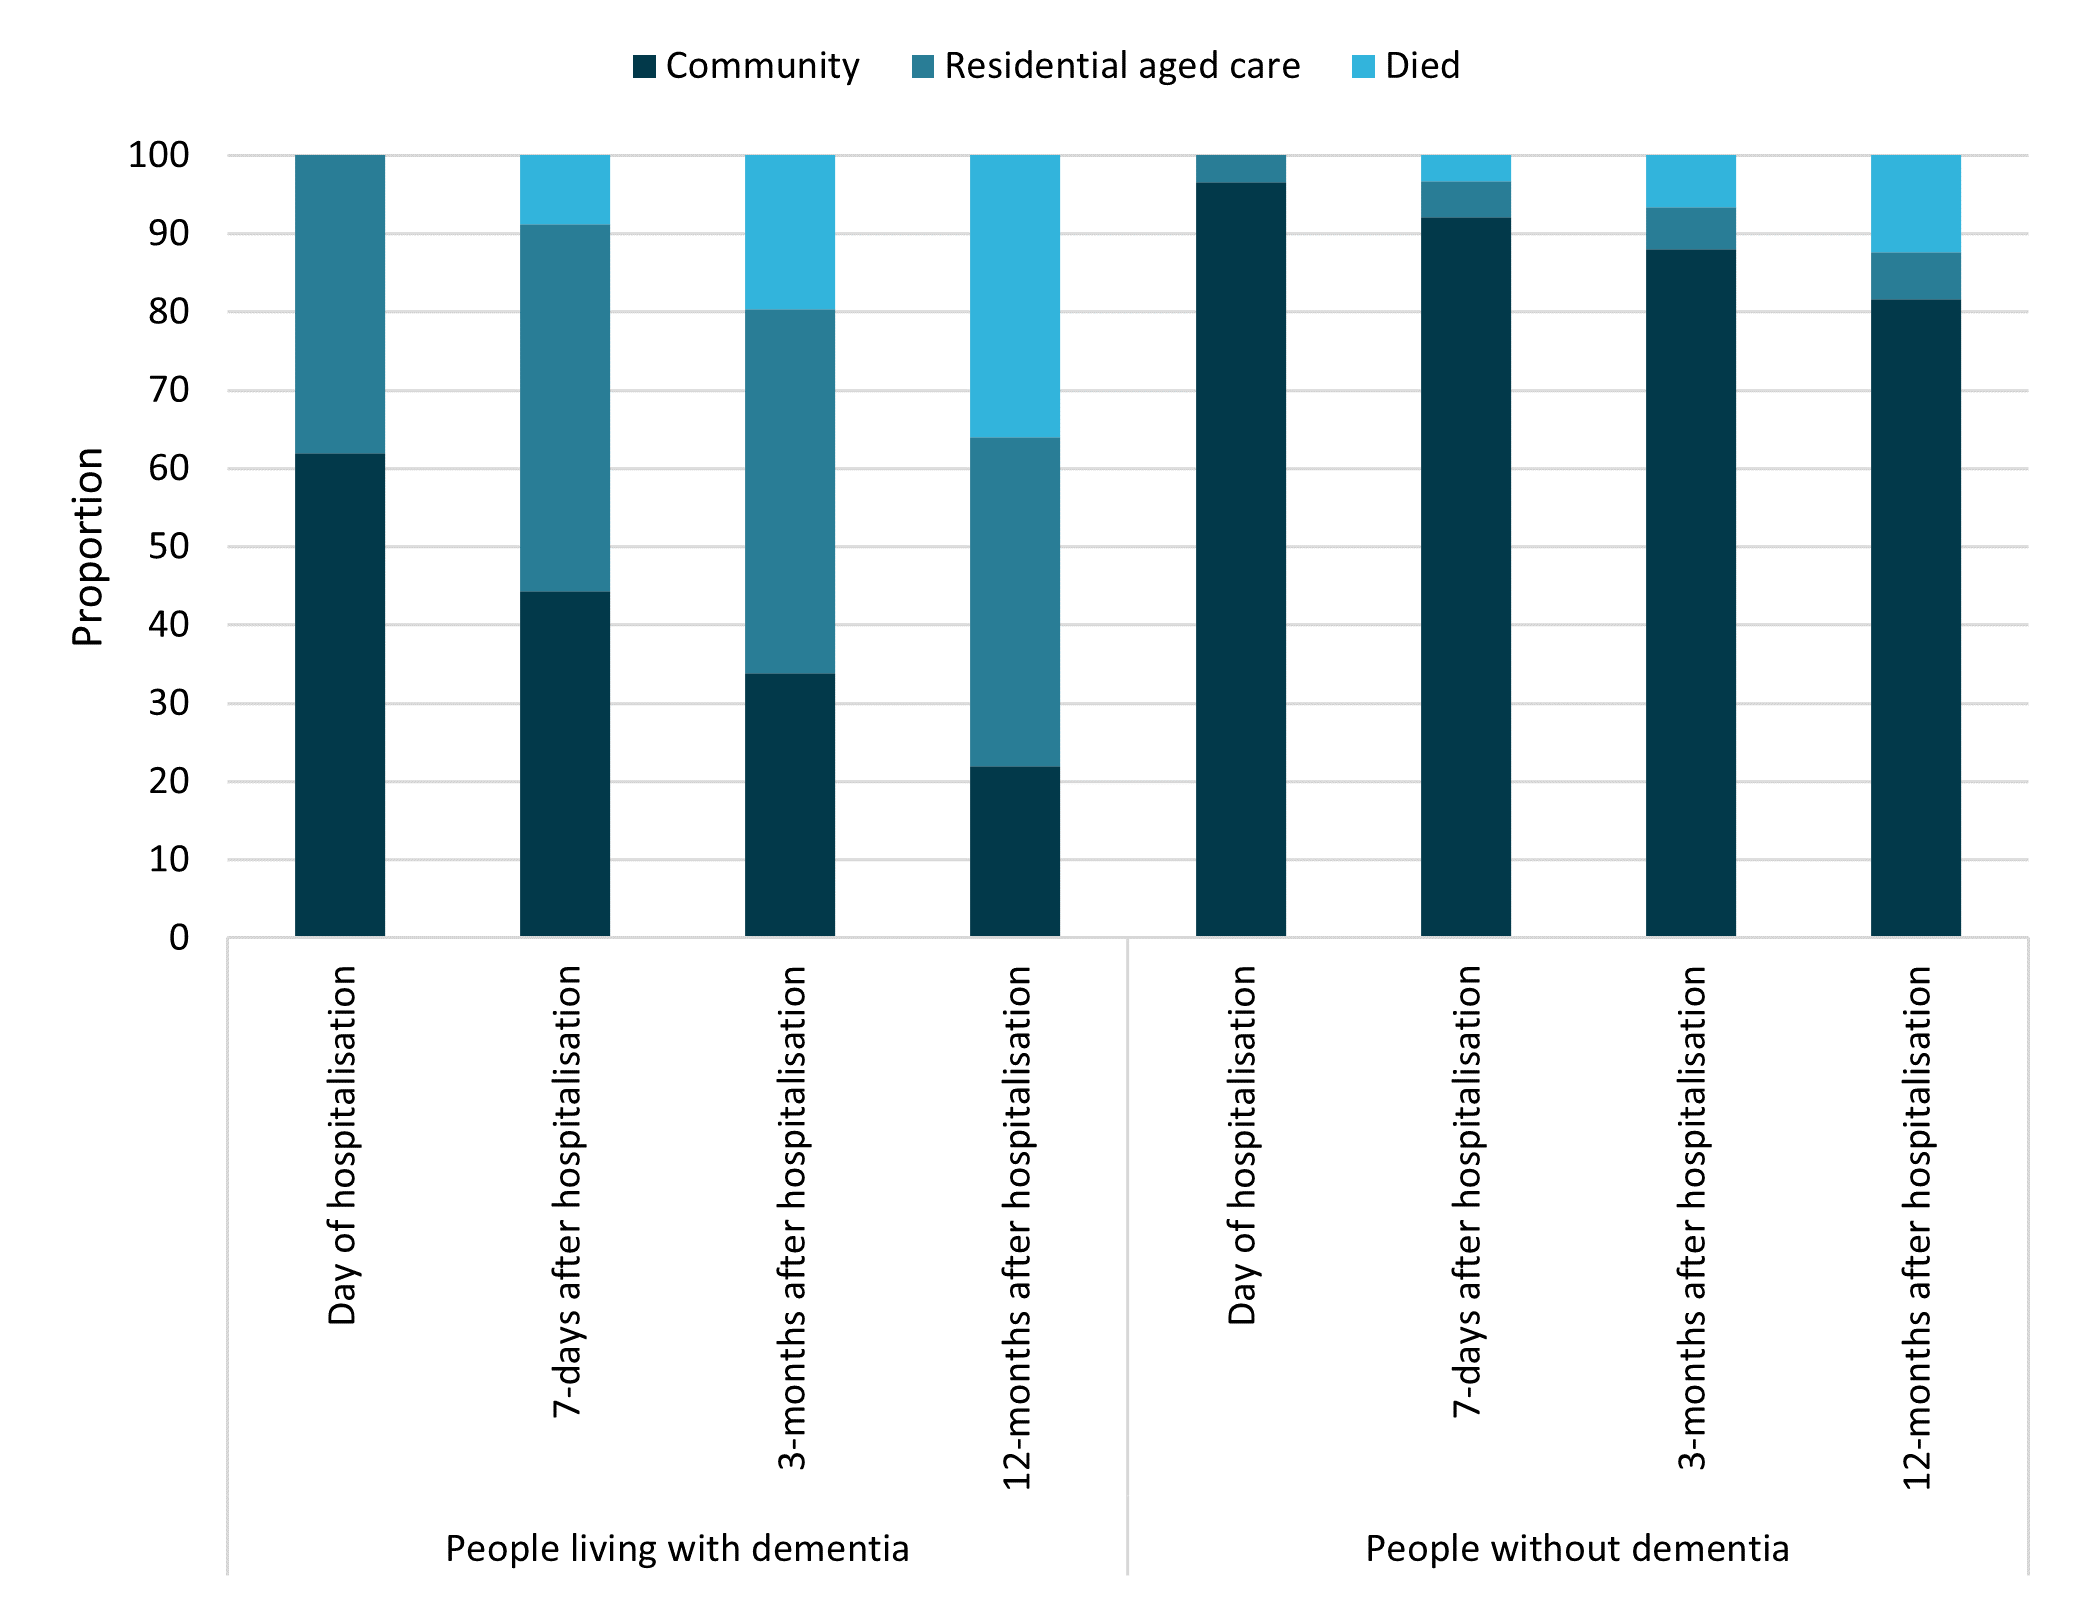 The figure is a bar chart and shows that compared to people without dementia, people living with dementia were much more likely to be living in residential aged care before their hospitalisation and to be living in residential aged care or to have died in the 7-days, 3-months and 12-months after their hospitalisation.